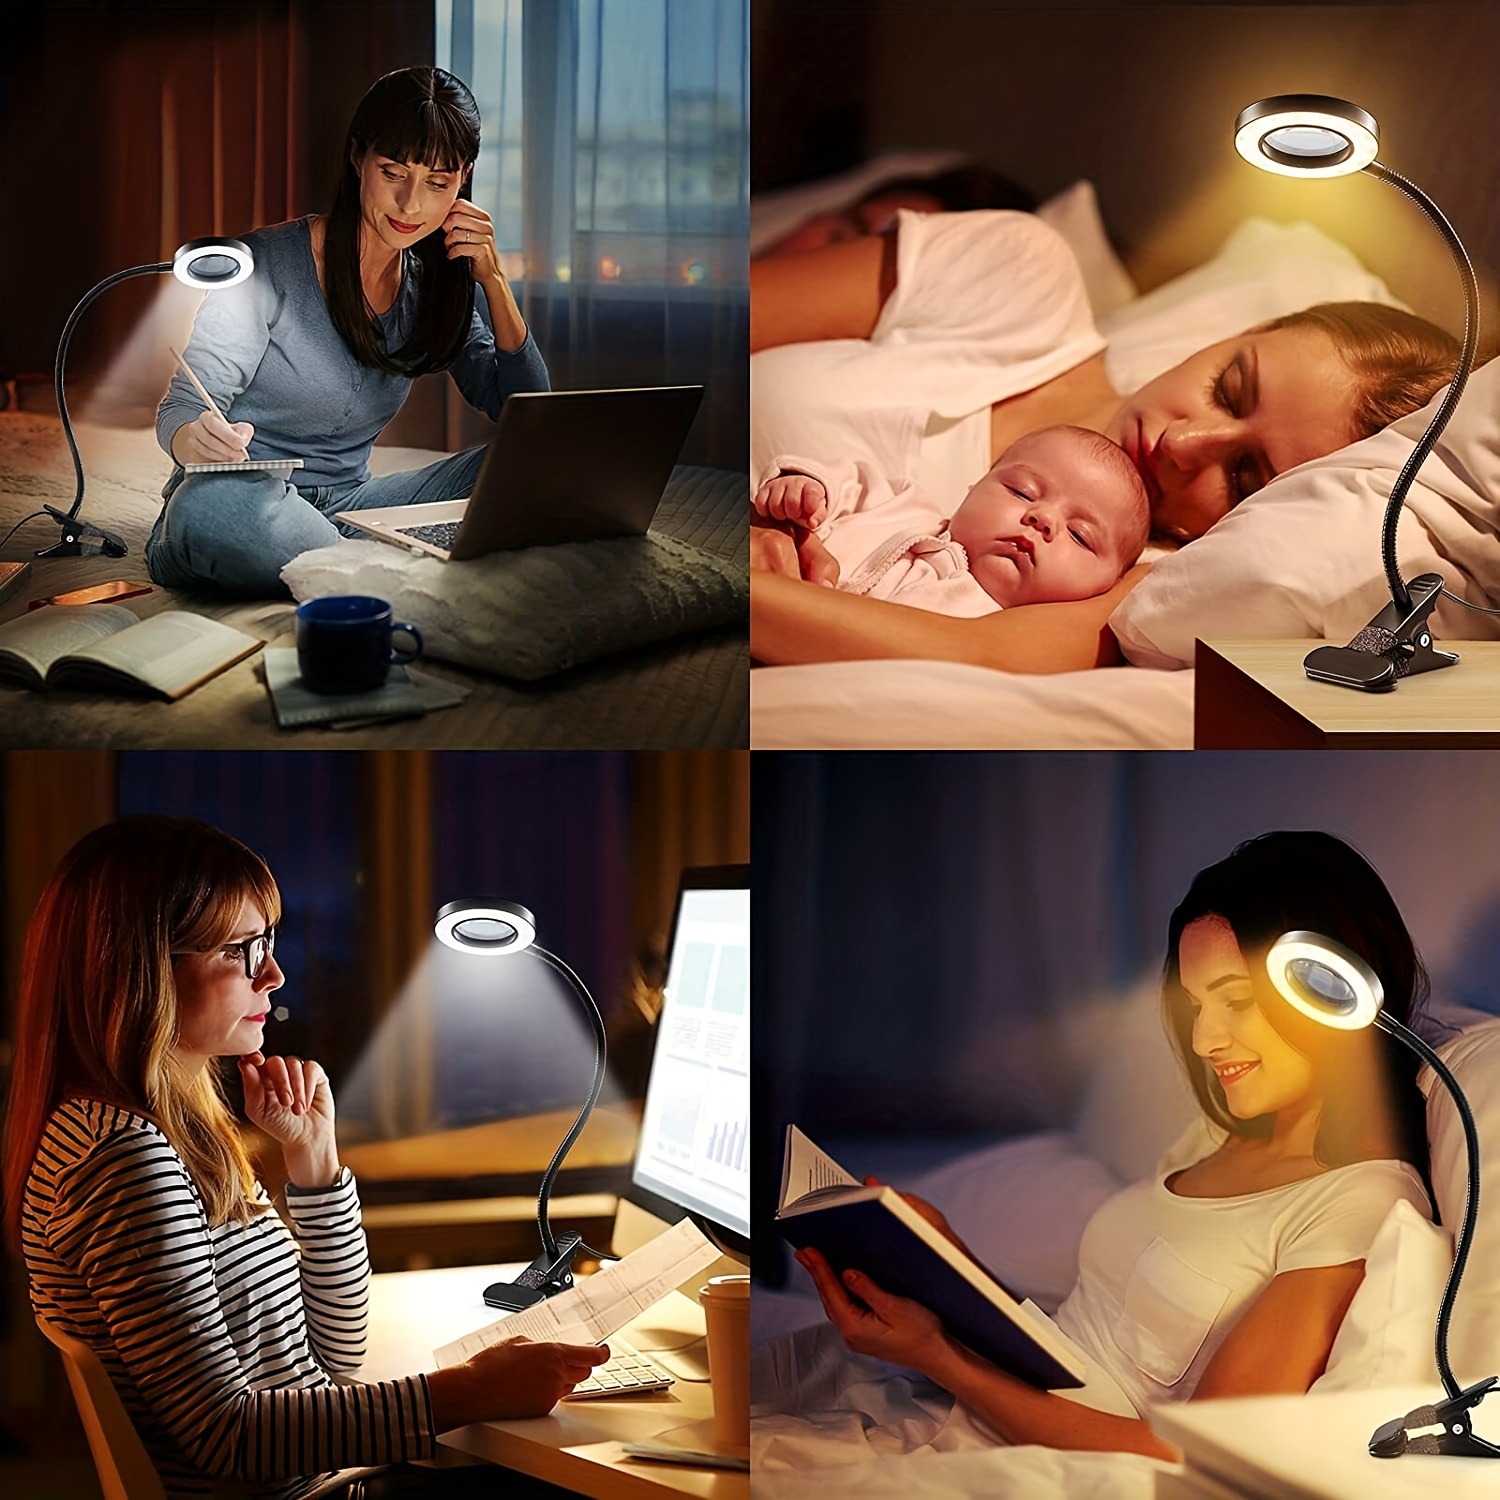 LED Nail Table Lamp Makeup Reading Desk Bed Dimmable Flexible Neck Manicure